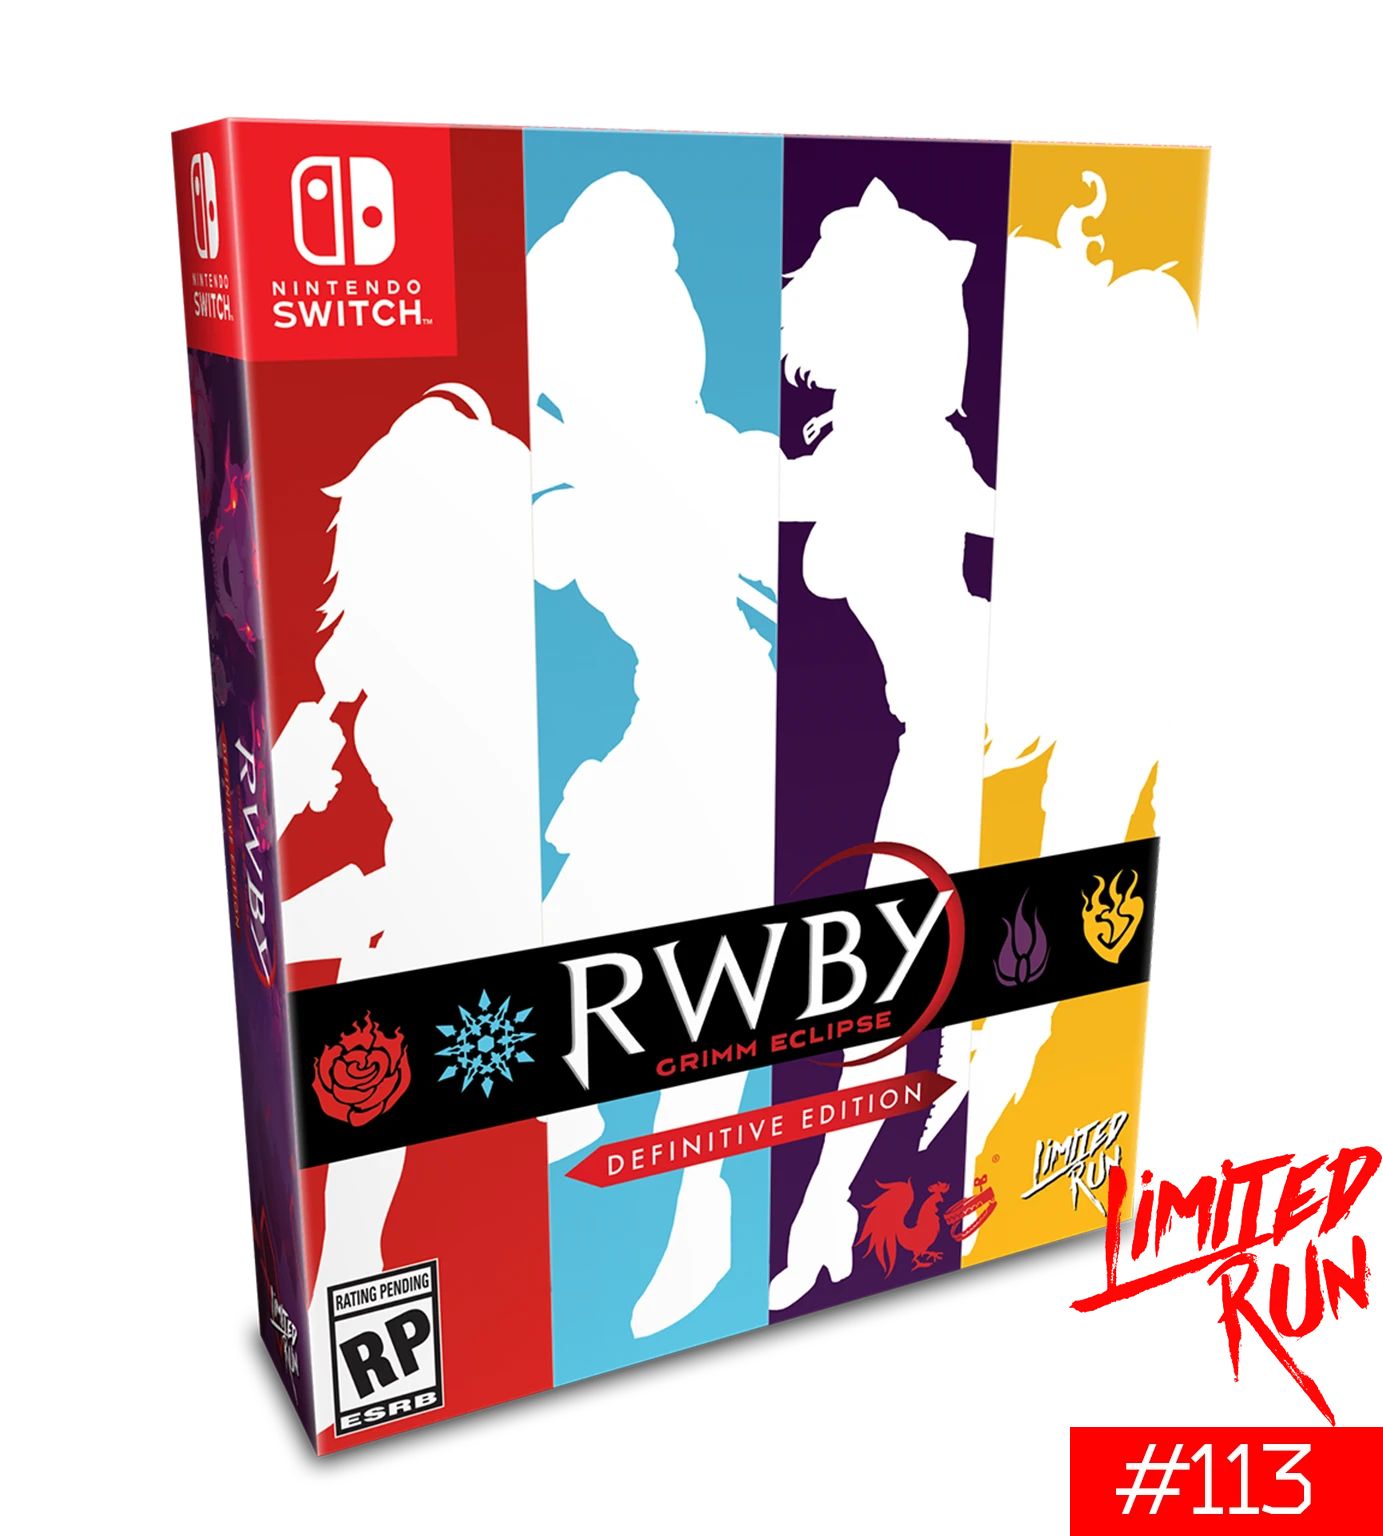 RWBY Grimm Eclipse Definitive Edition Gets Limited Run Physical Release